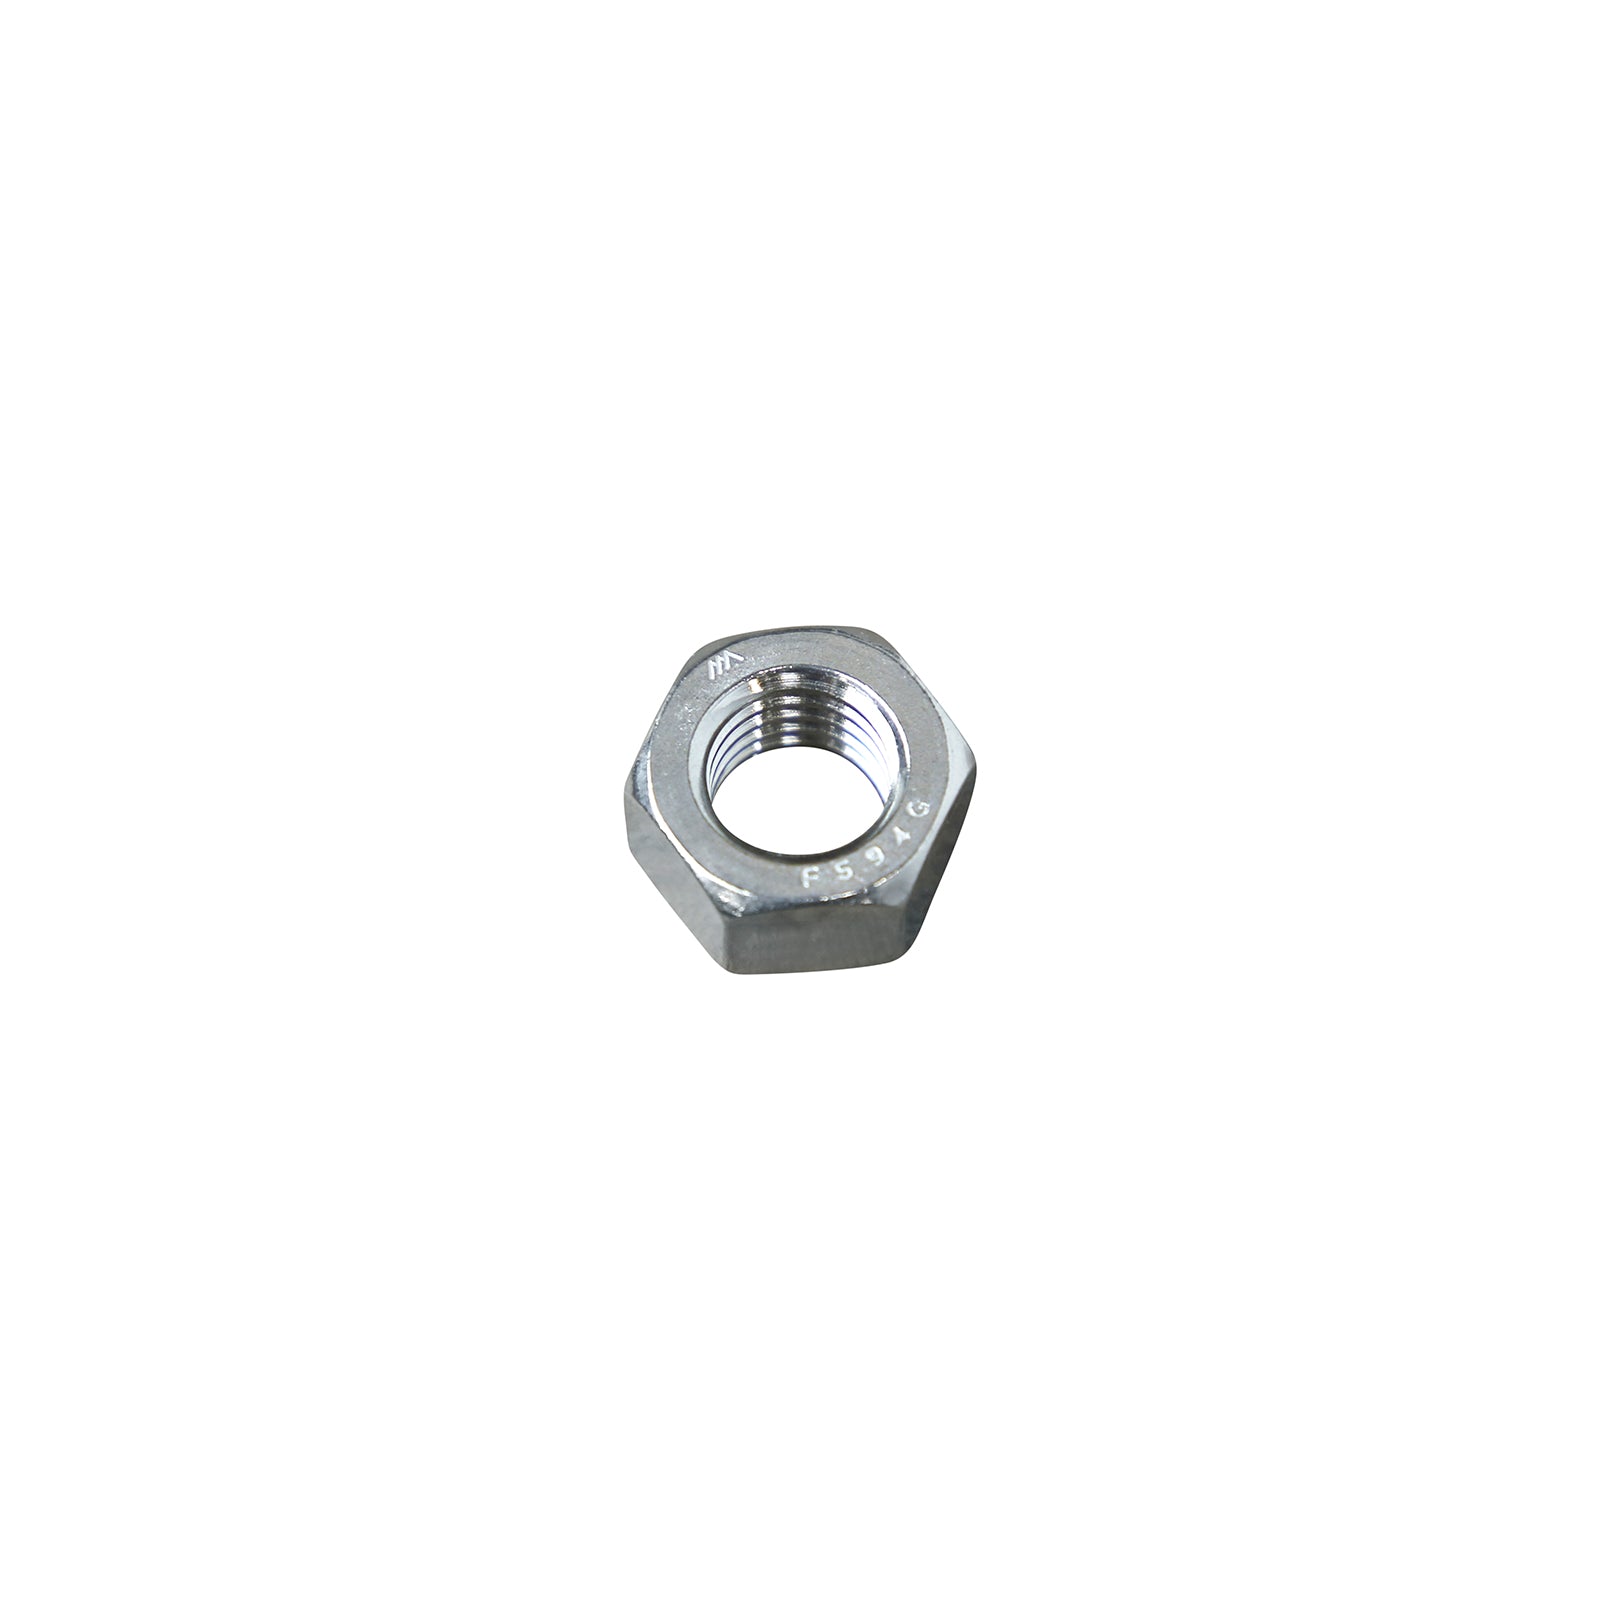 1/2"-13 Conquest Hex Nut - 316 Stainless Steel